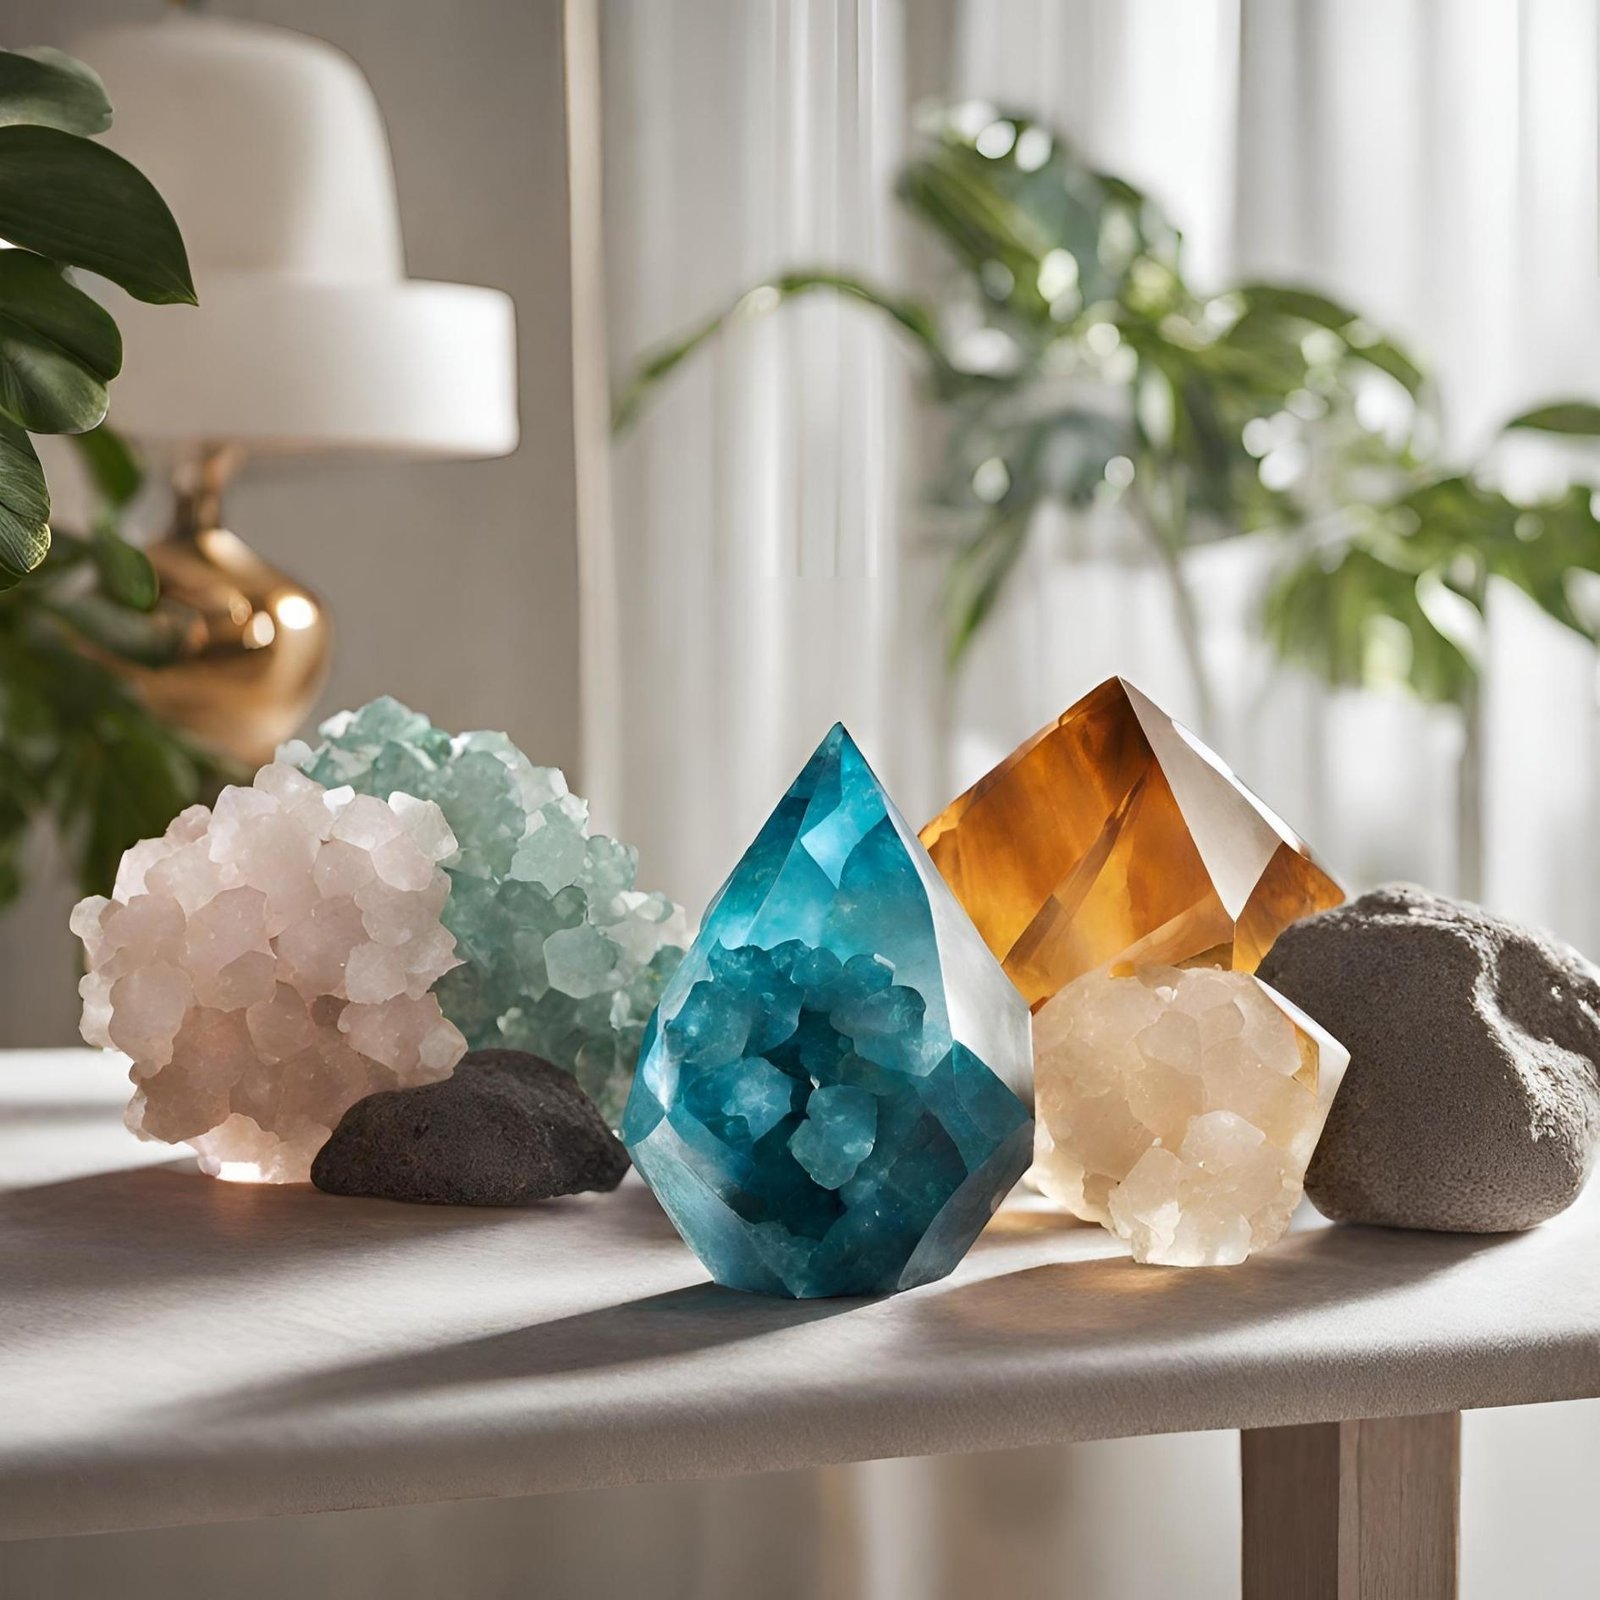 Enhance the Energy of Your Home with These Powerful Feng Shui Crystals